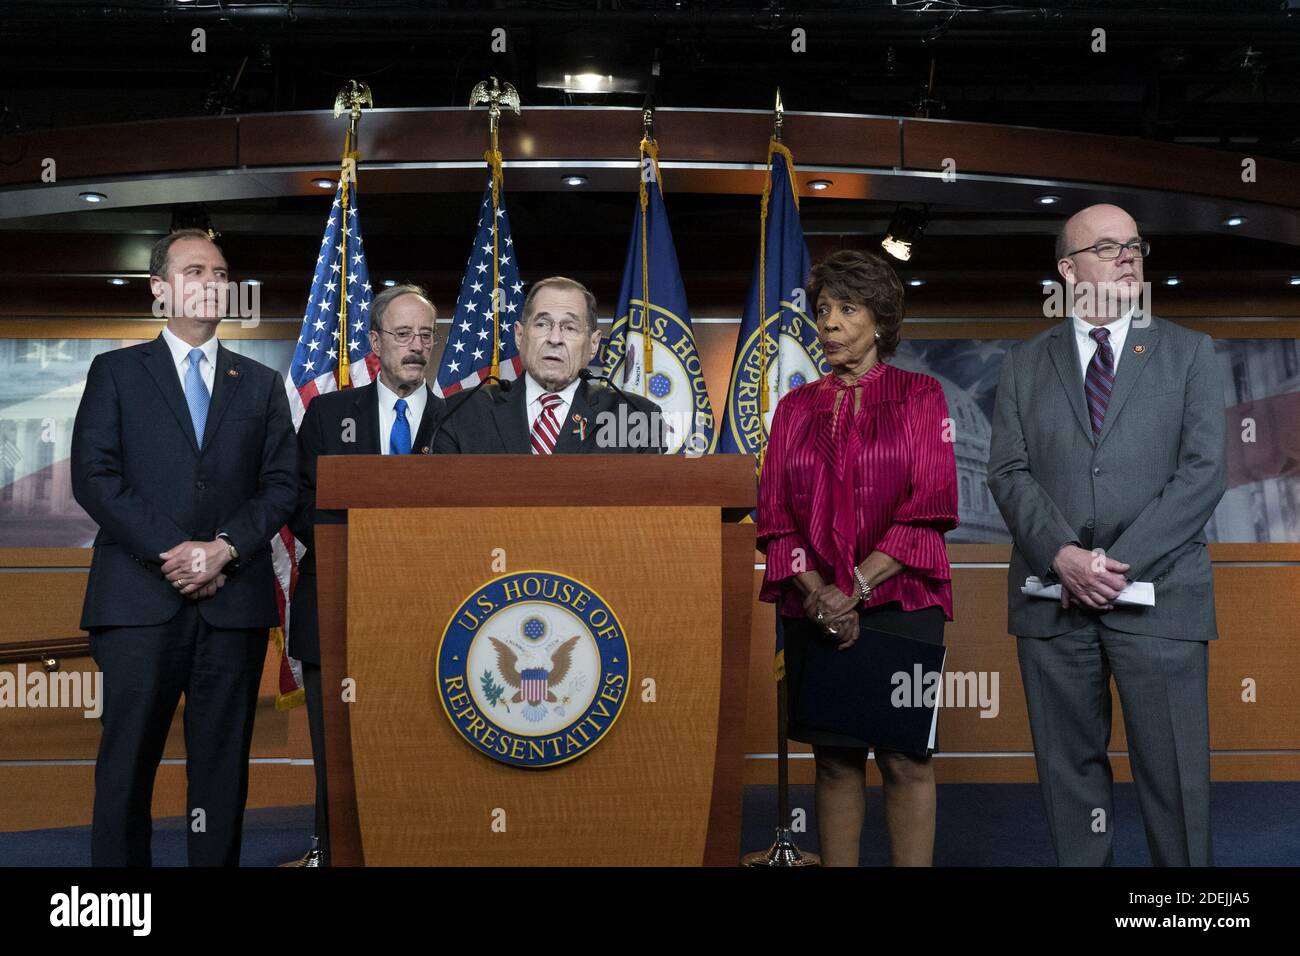 Contempt Vote Press Conference in Washington. Democrats escalate their fight with the Trump administration. Intelligence Committee Chairman Adam Schiff (Democrat of California), Foreign Affairs Committee Chairman Eliot Engel (Democrat of New York), House Judiciary Committee Chairman Jerrold Nadler (Democrat of New York), Financial Services Committee Chairwoman Maxine Waters (Democrat of California), and Rules Committee Chairman Jim McGovern (Democrat of Massachussetts) attend a press conference on Capitol Hill in Washington DC, USA, on June 11, 2019. The press conference followed a House vote, Stock Photo